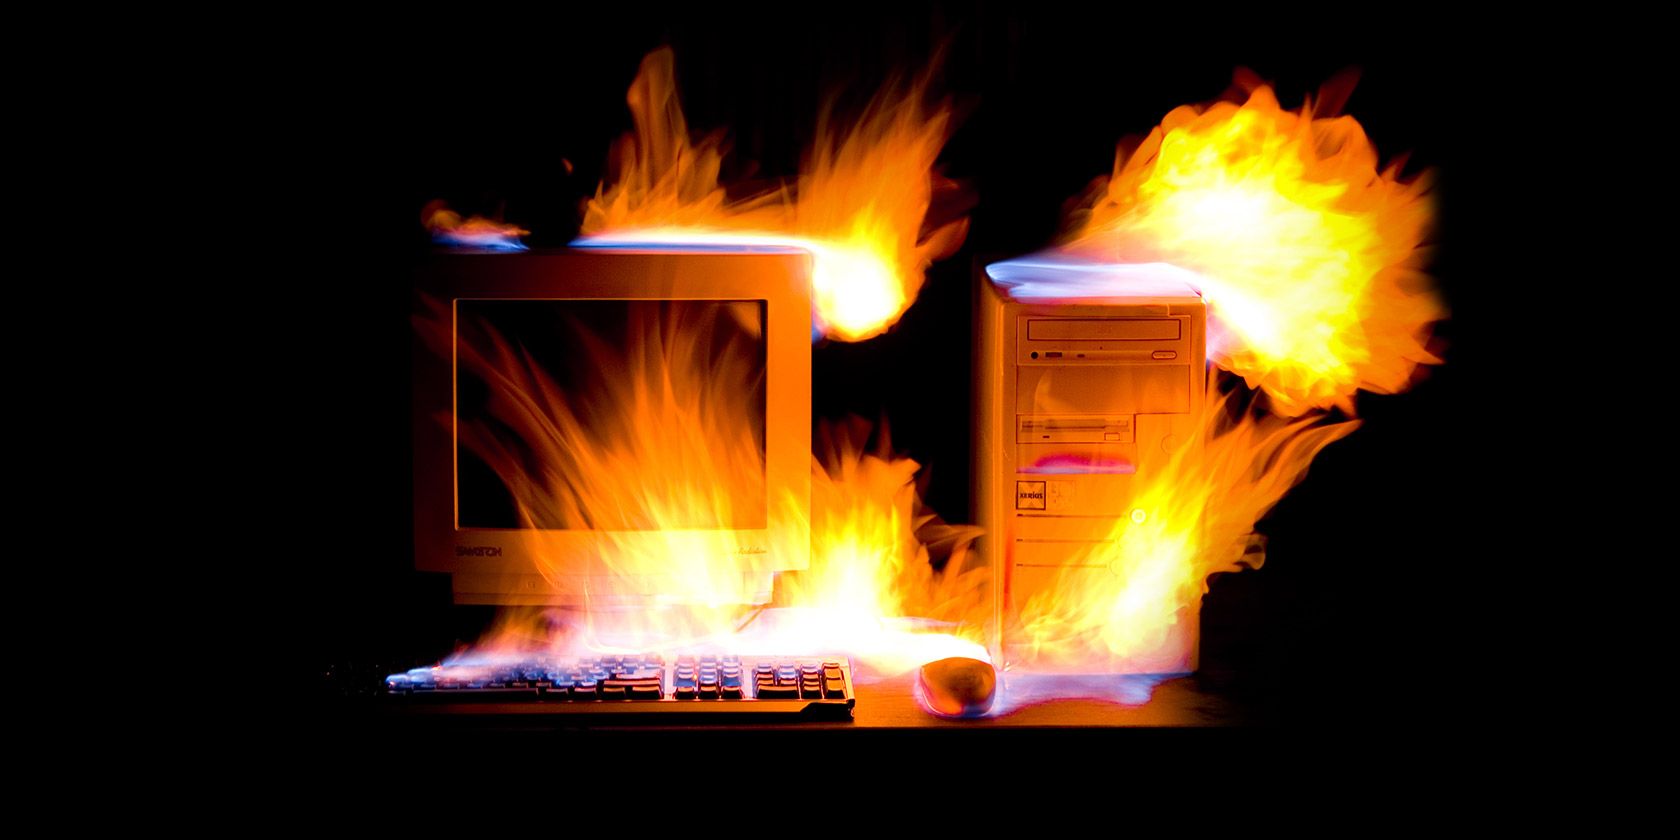 PC Operating Temperatures: How Hot Is Too Hot?